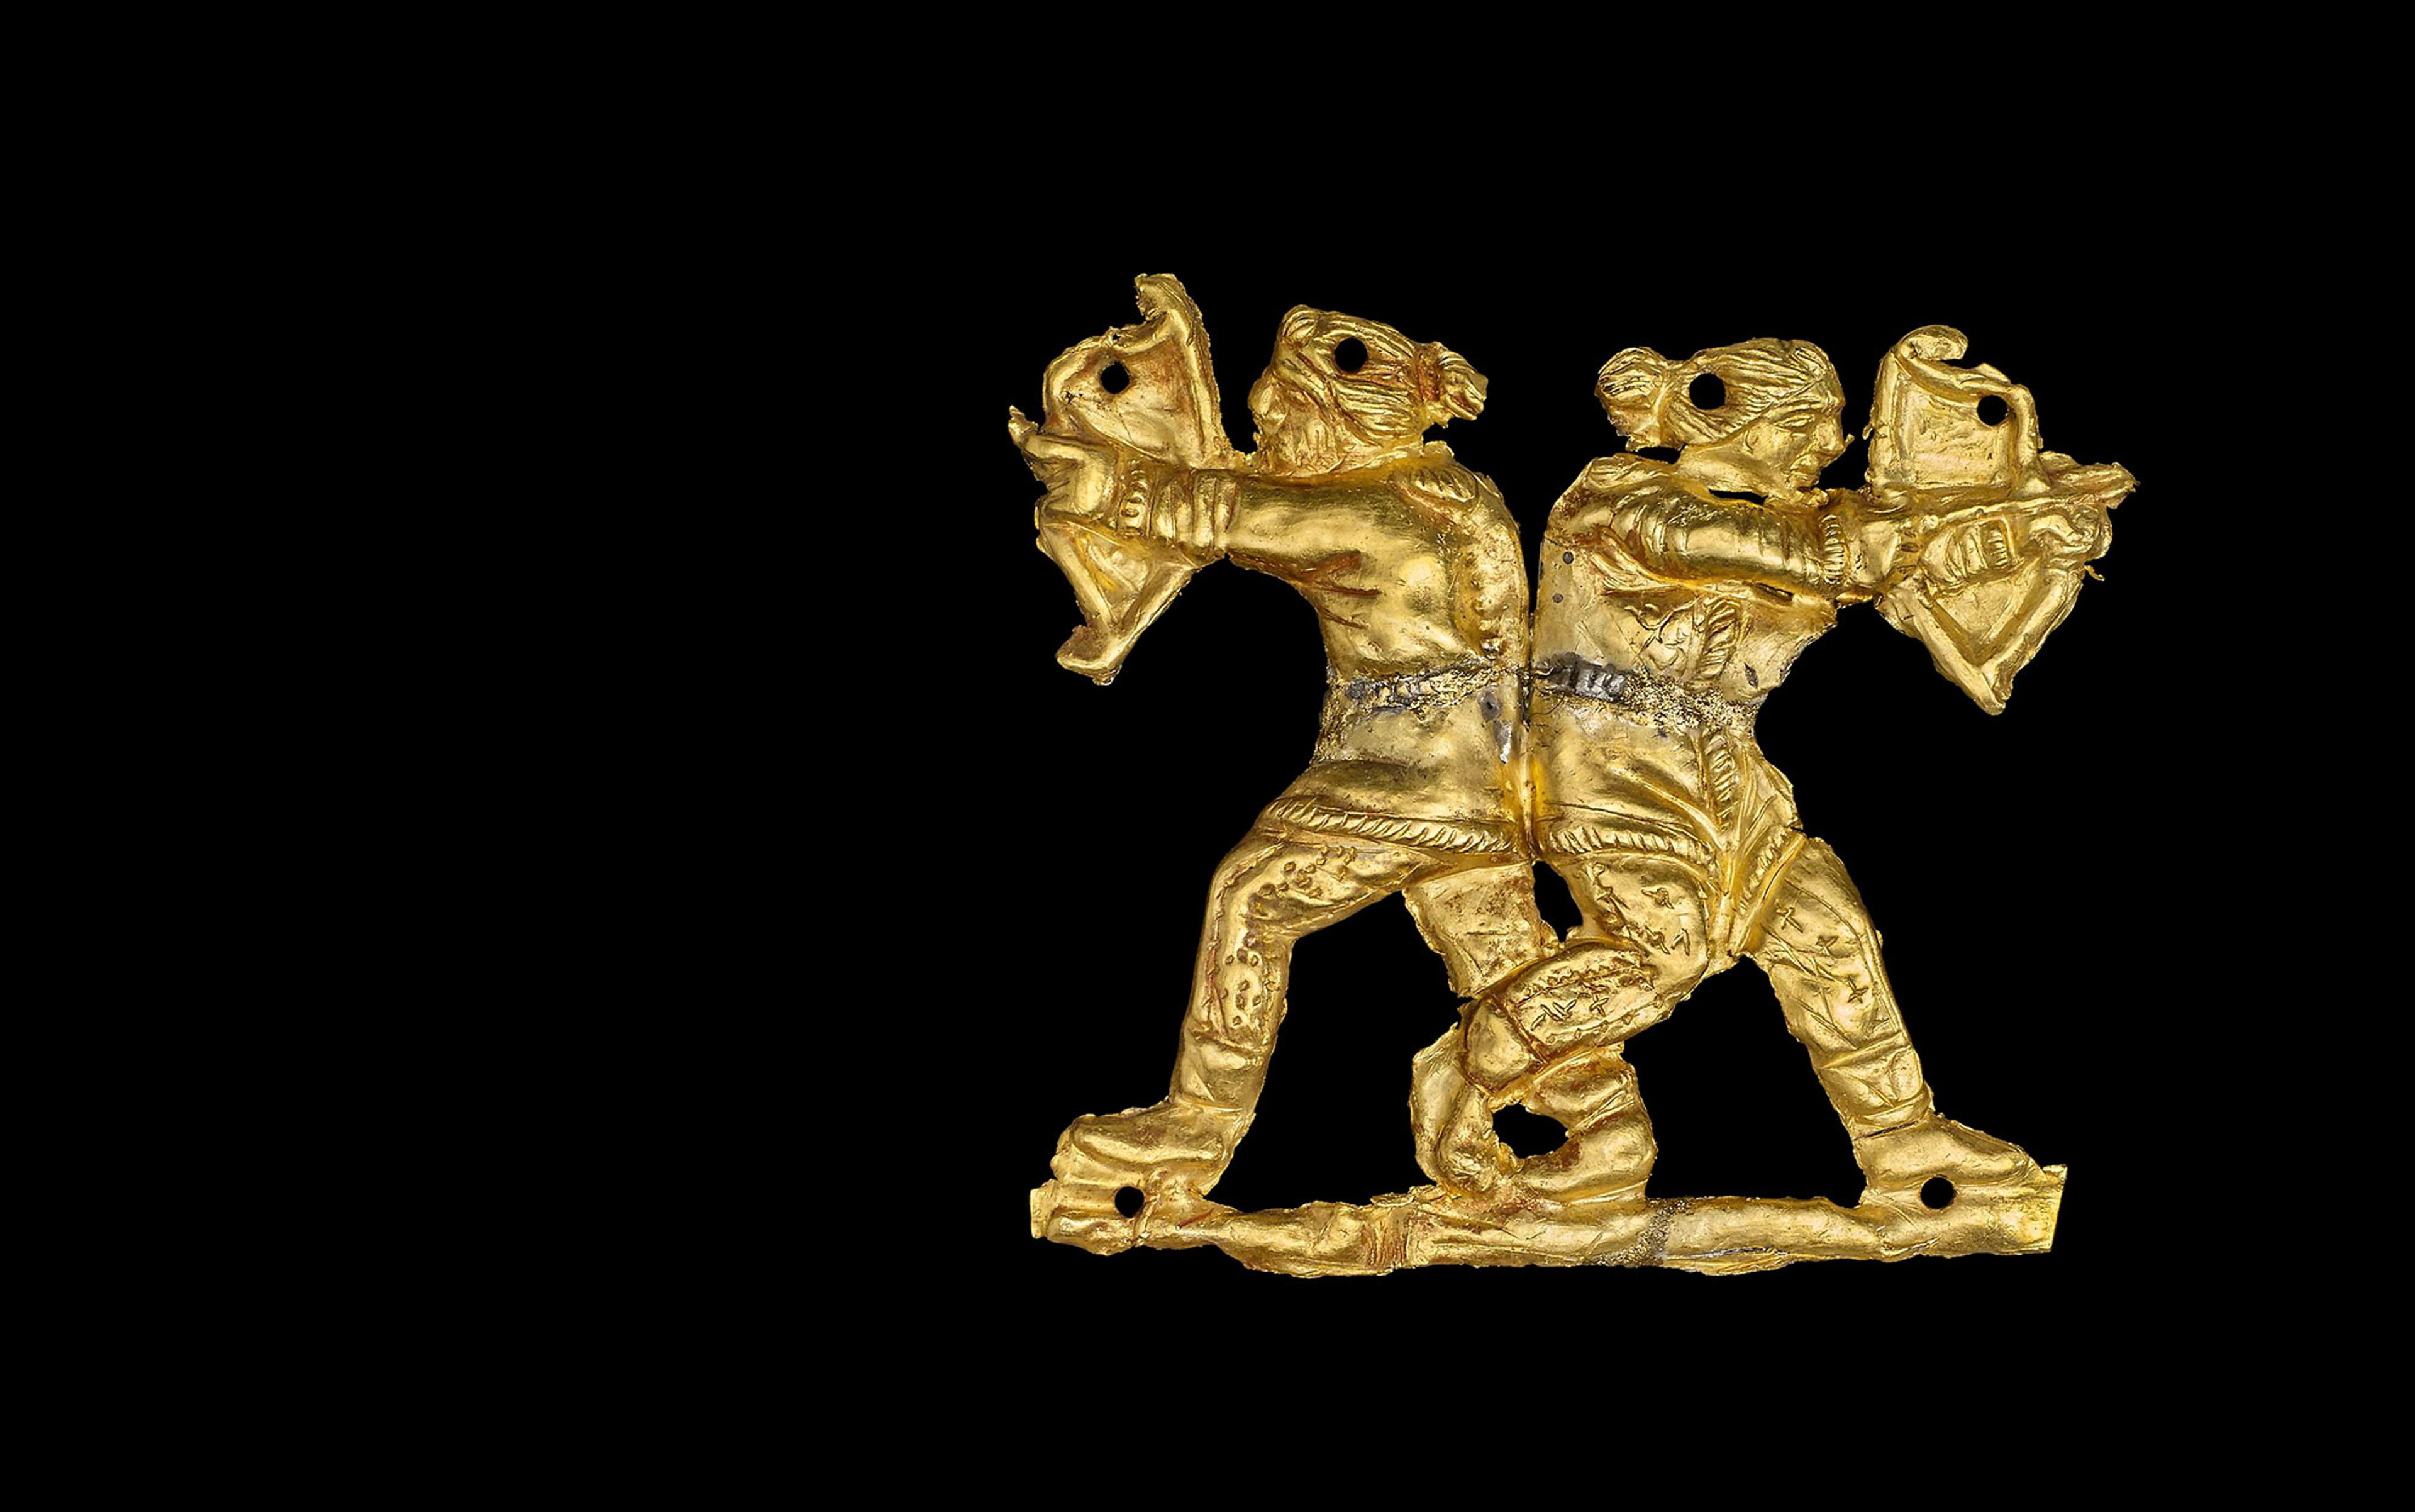 Gold sew-on clothing appliqué in the form of two Scythian archers back to back.